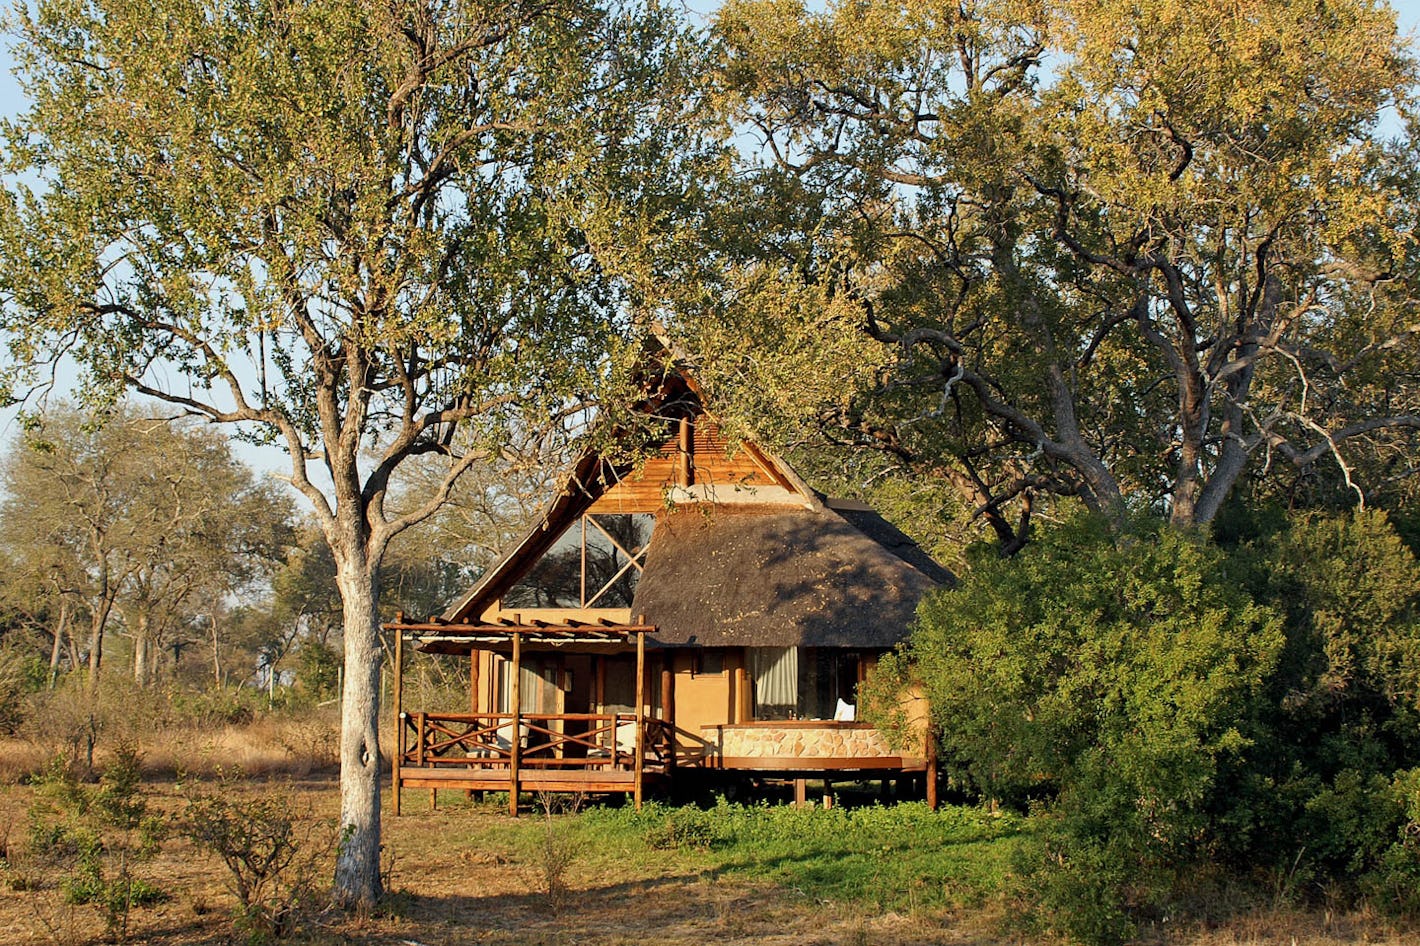 Luxury safari lodge situated in the southern portion of the Kruger National Park. The remoteness and exclusivity of Lukimbi allows guests a unique African safari experience.